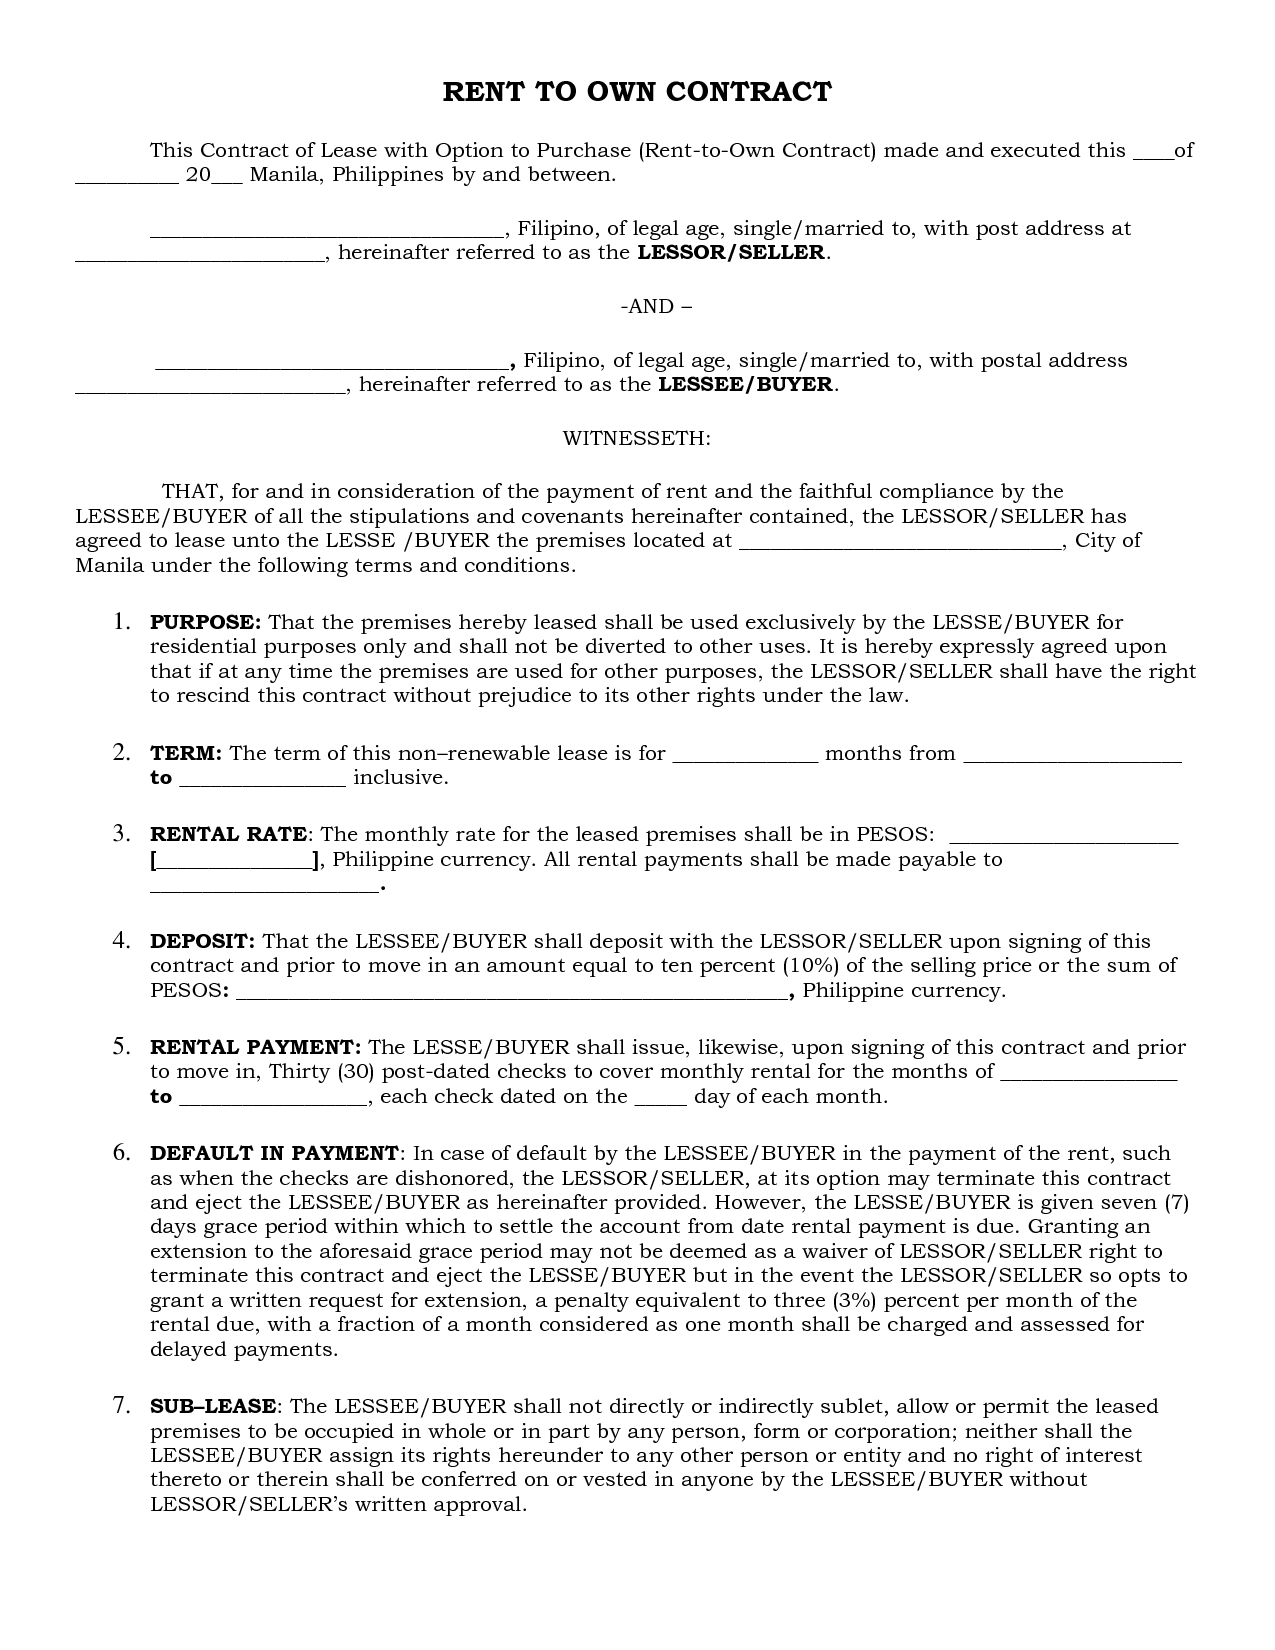 Sample Rent To Own Lease Agreement Free Printable Documents